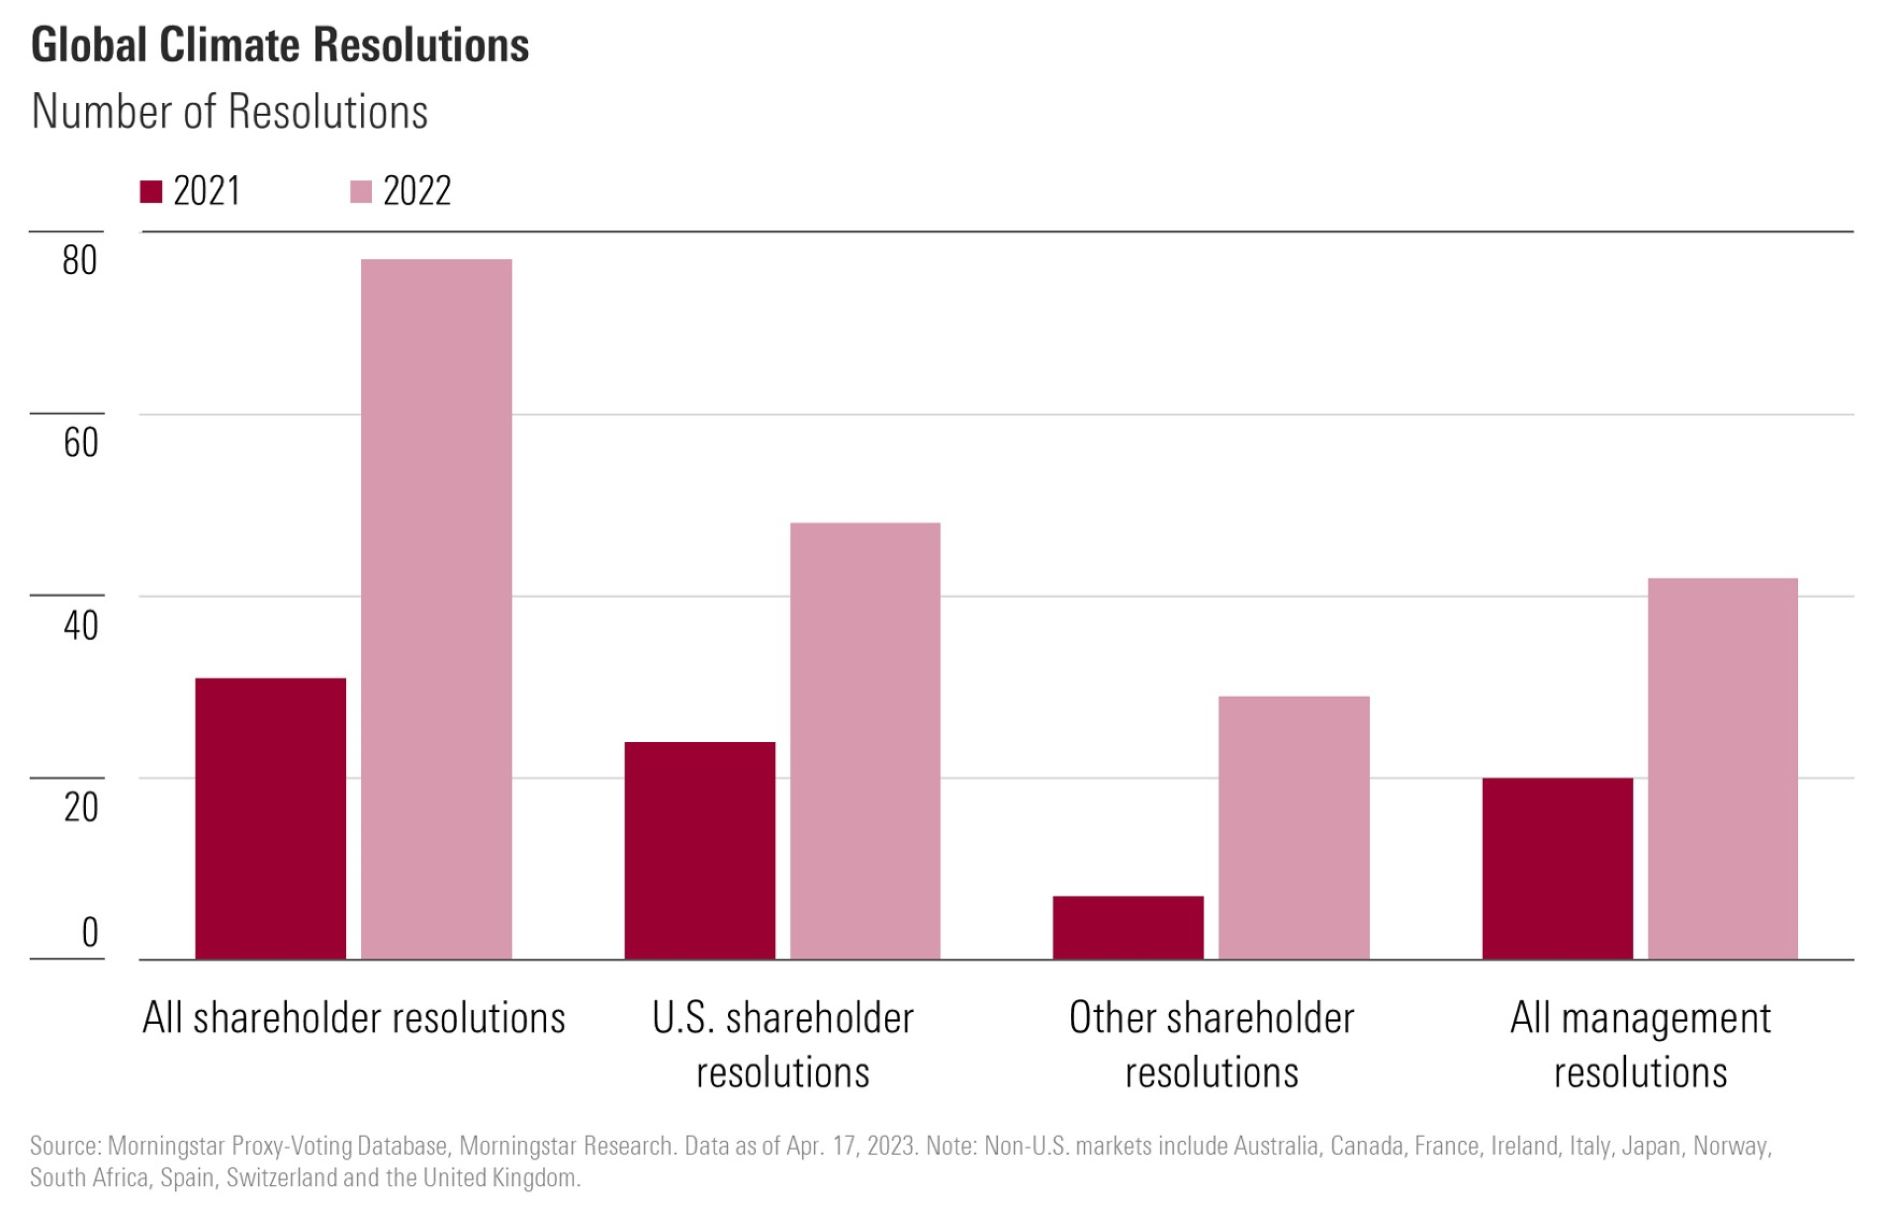 Bar chart showing that the number of shareholder and management resolutions addressing climate issues increased sharply in 2022.